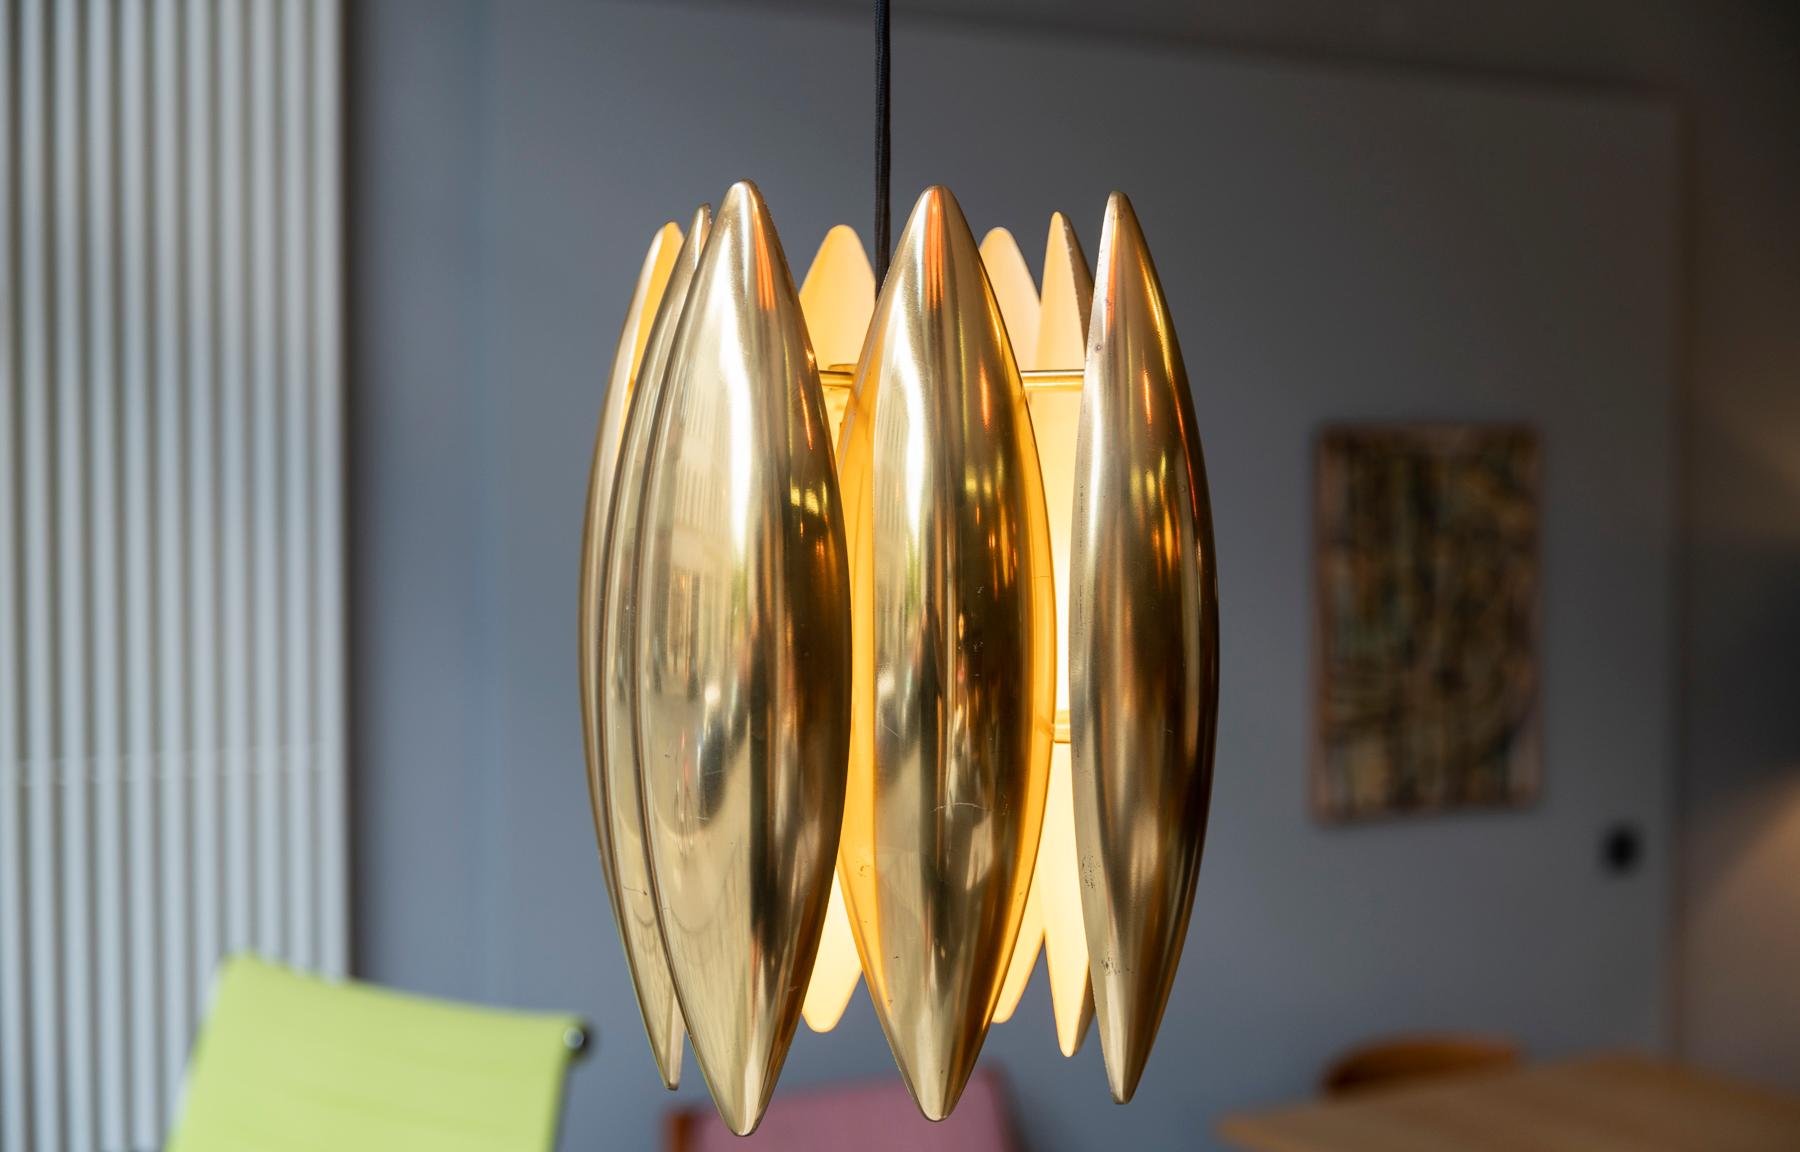 The 'Kastor' pendant was designed by Jo Hammerborg for famous Danish manufacturer Fog & Mørup in the 1960s. At this time and for many years, Jo Hammerborg was head of design of Fog & Mørup.

The Kastor series consisted of three different models: a